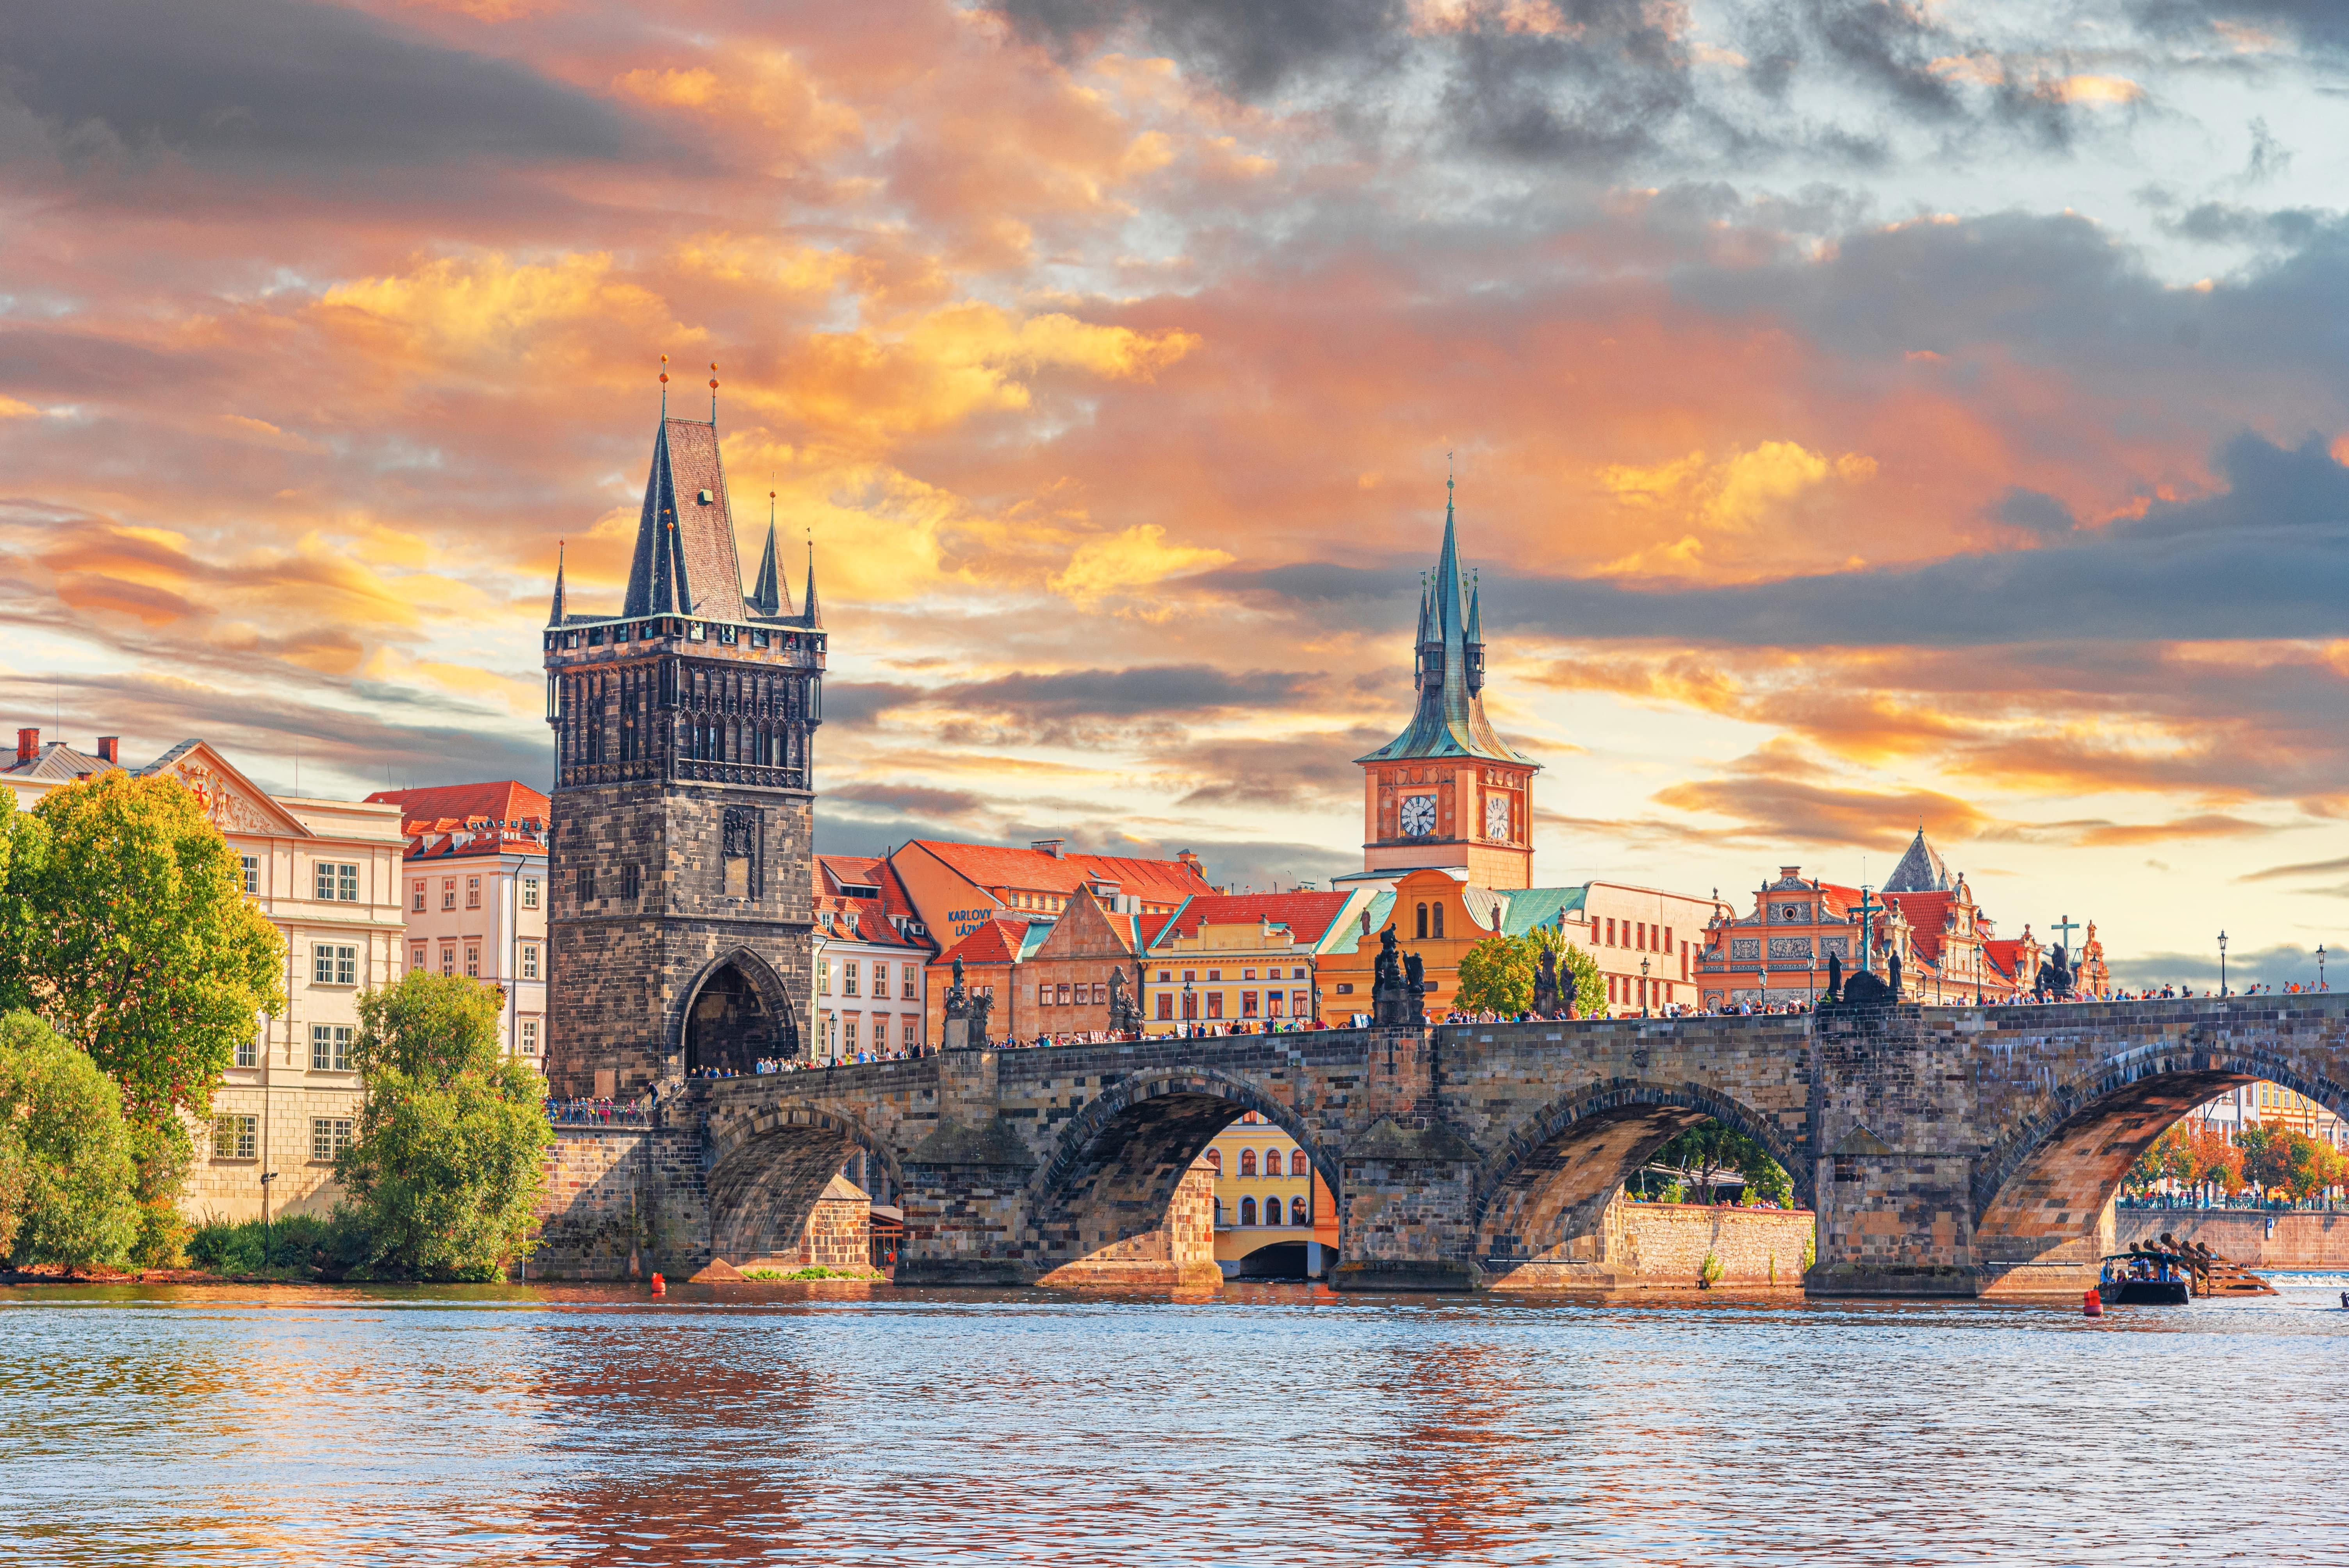 harles bridge, Czech Republic. Scenic aerial sunset on the architecture of the Old Town Pier and Charles Bridge over the Vltava River in Prague, Czech Republic.